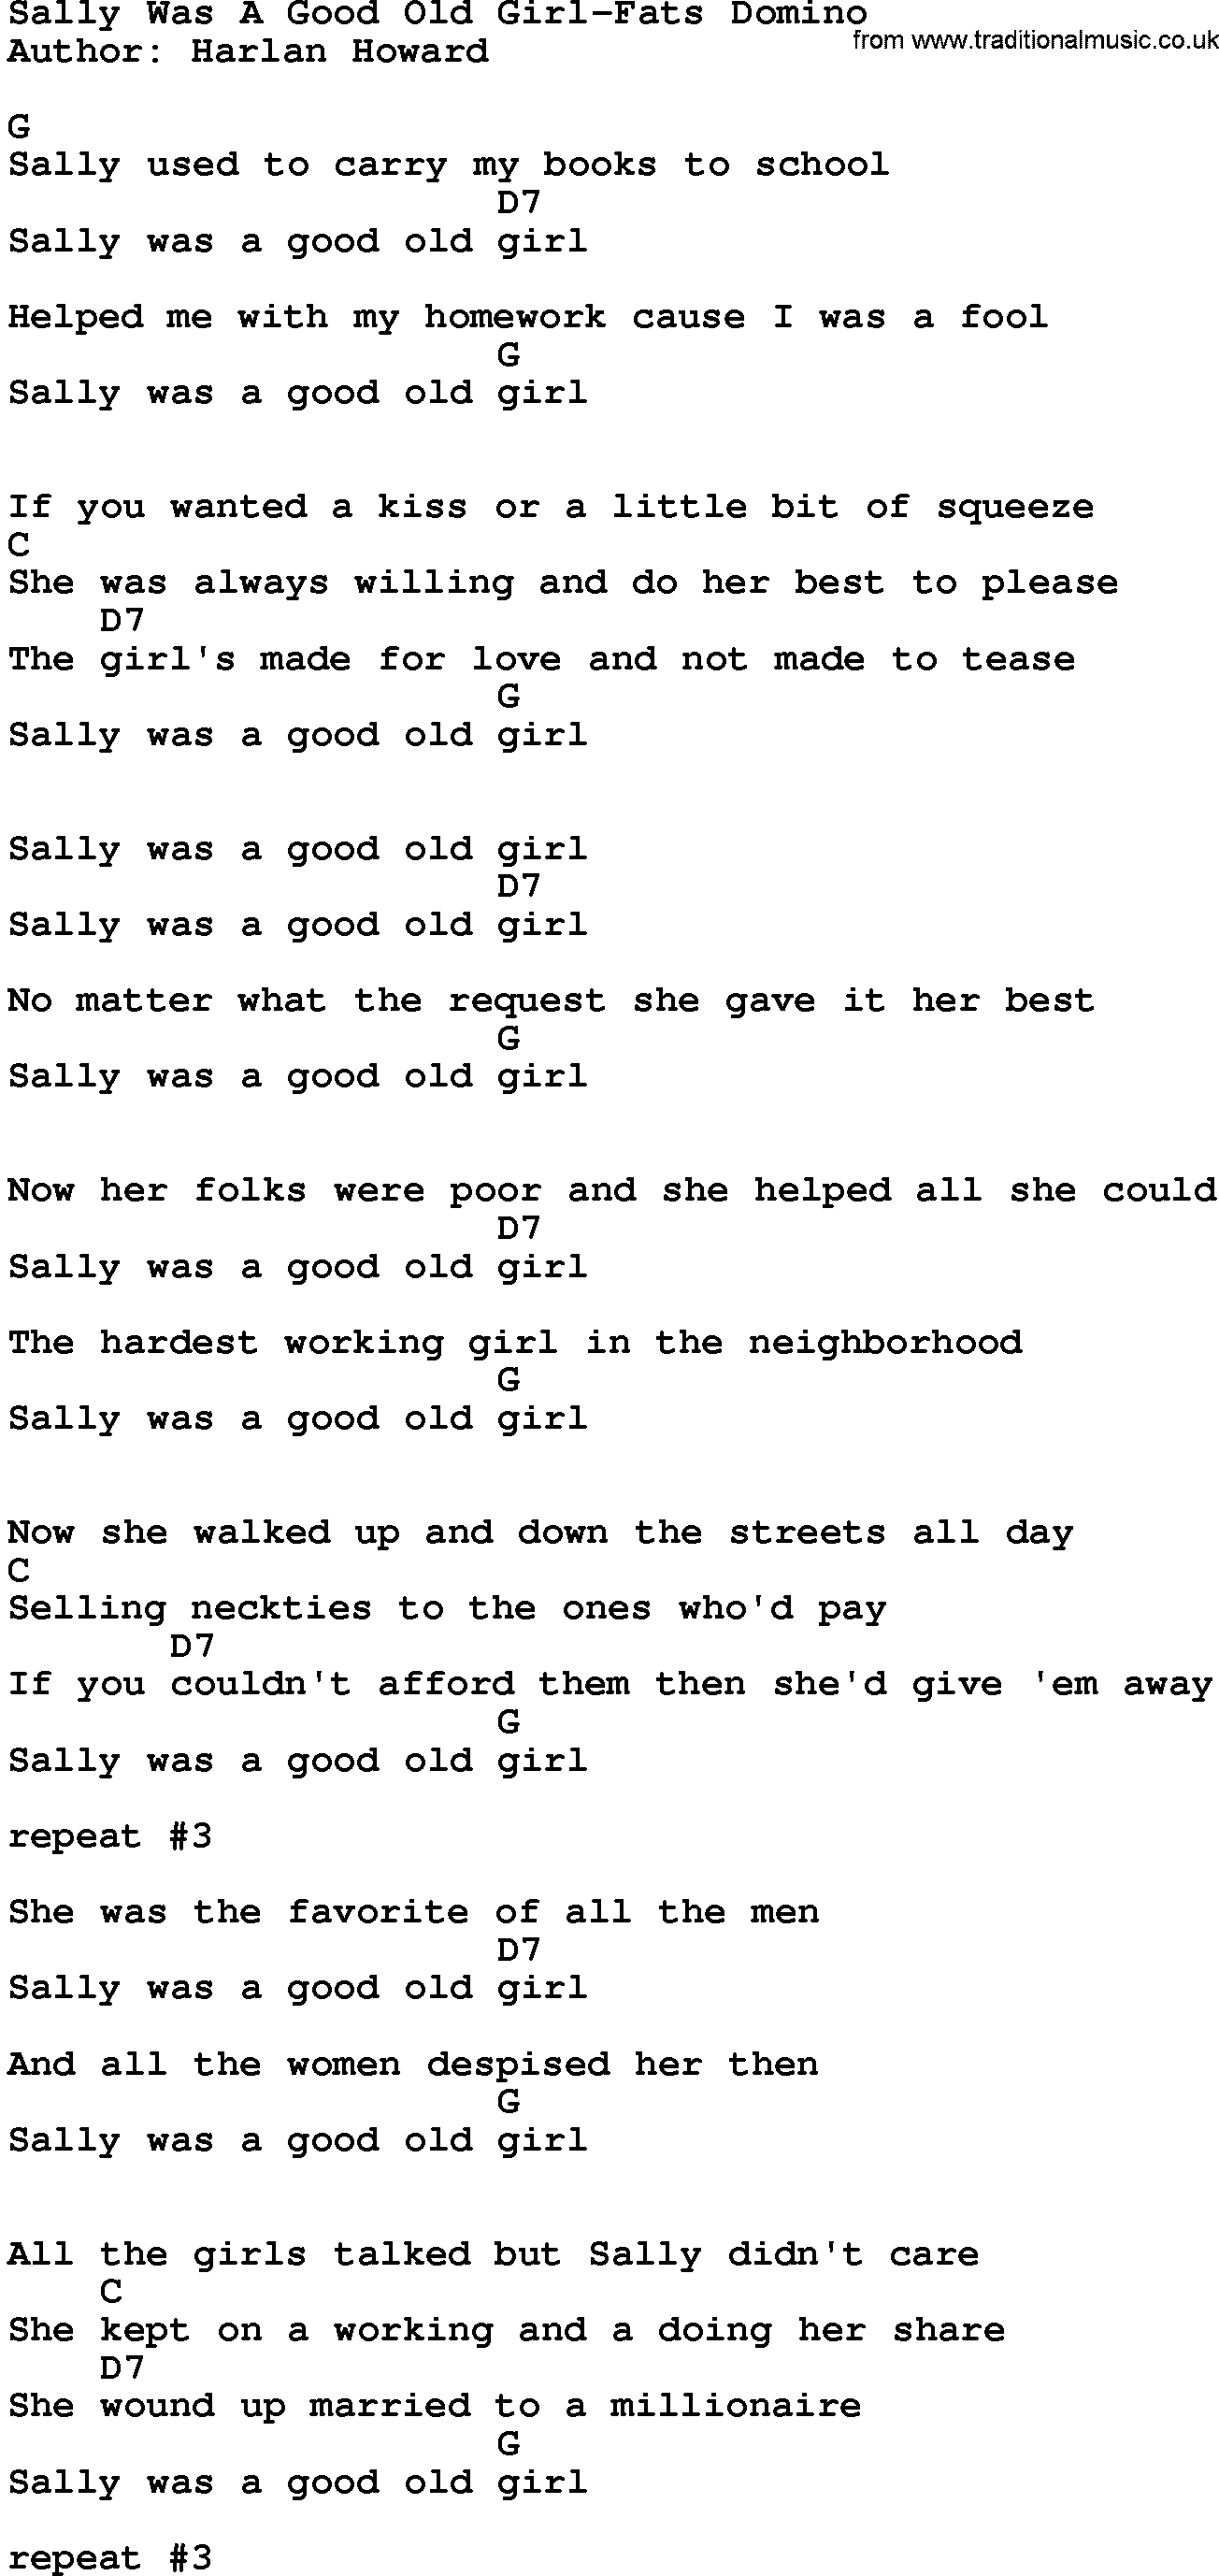 Country music song: Sally Was A Good Old Girl-Fats Domino lyrics and chords